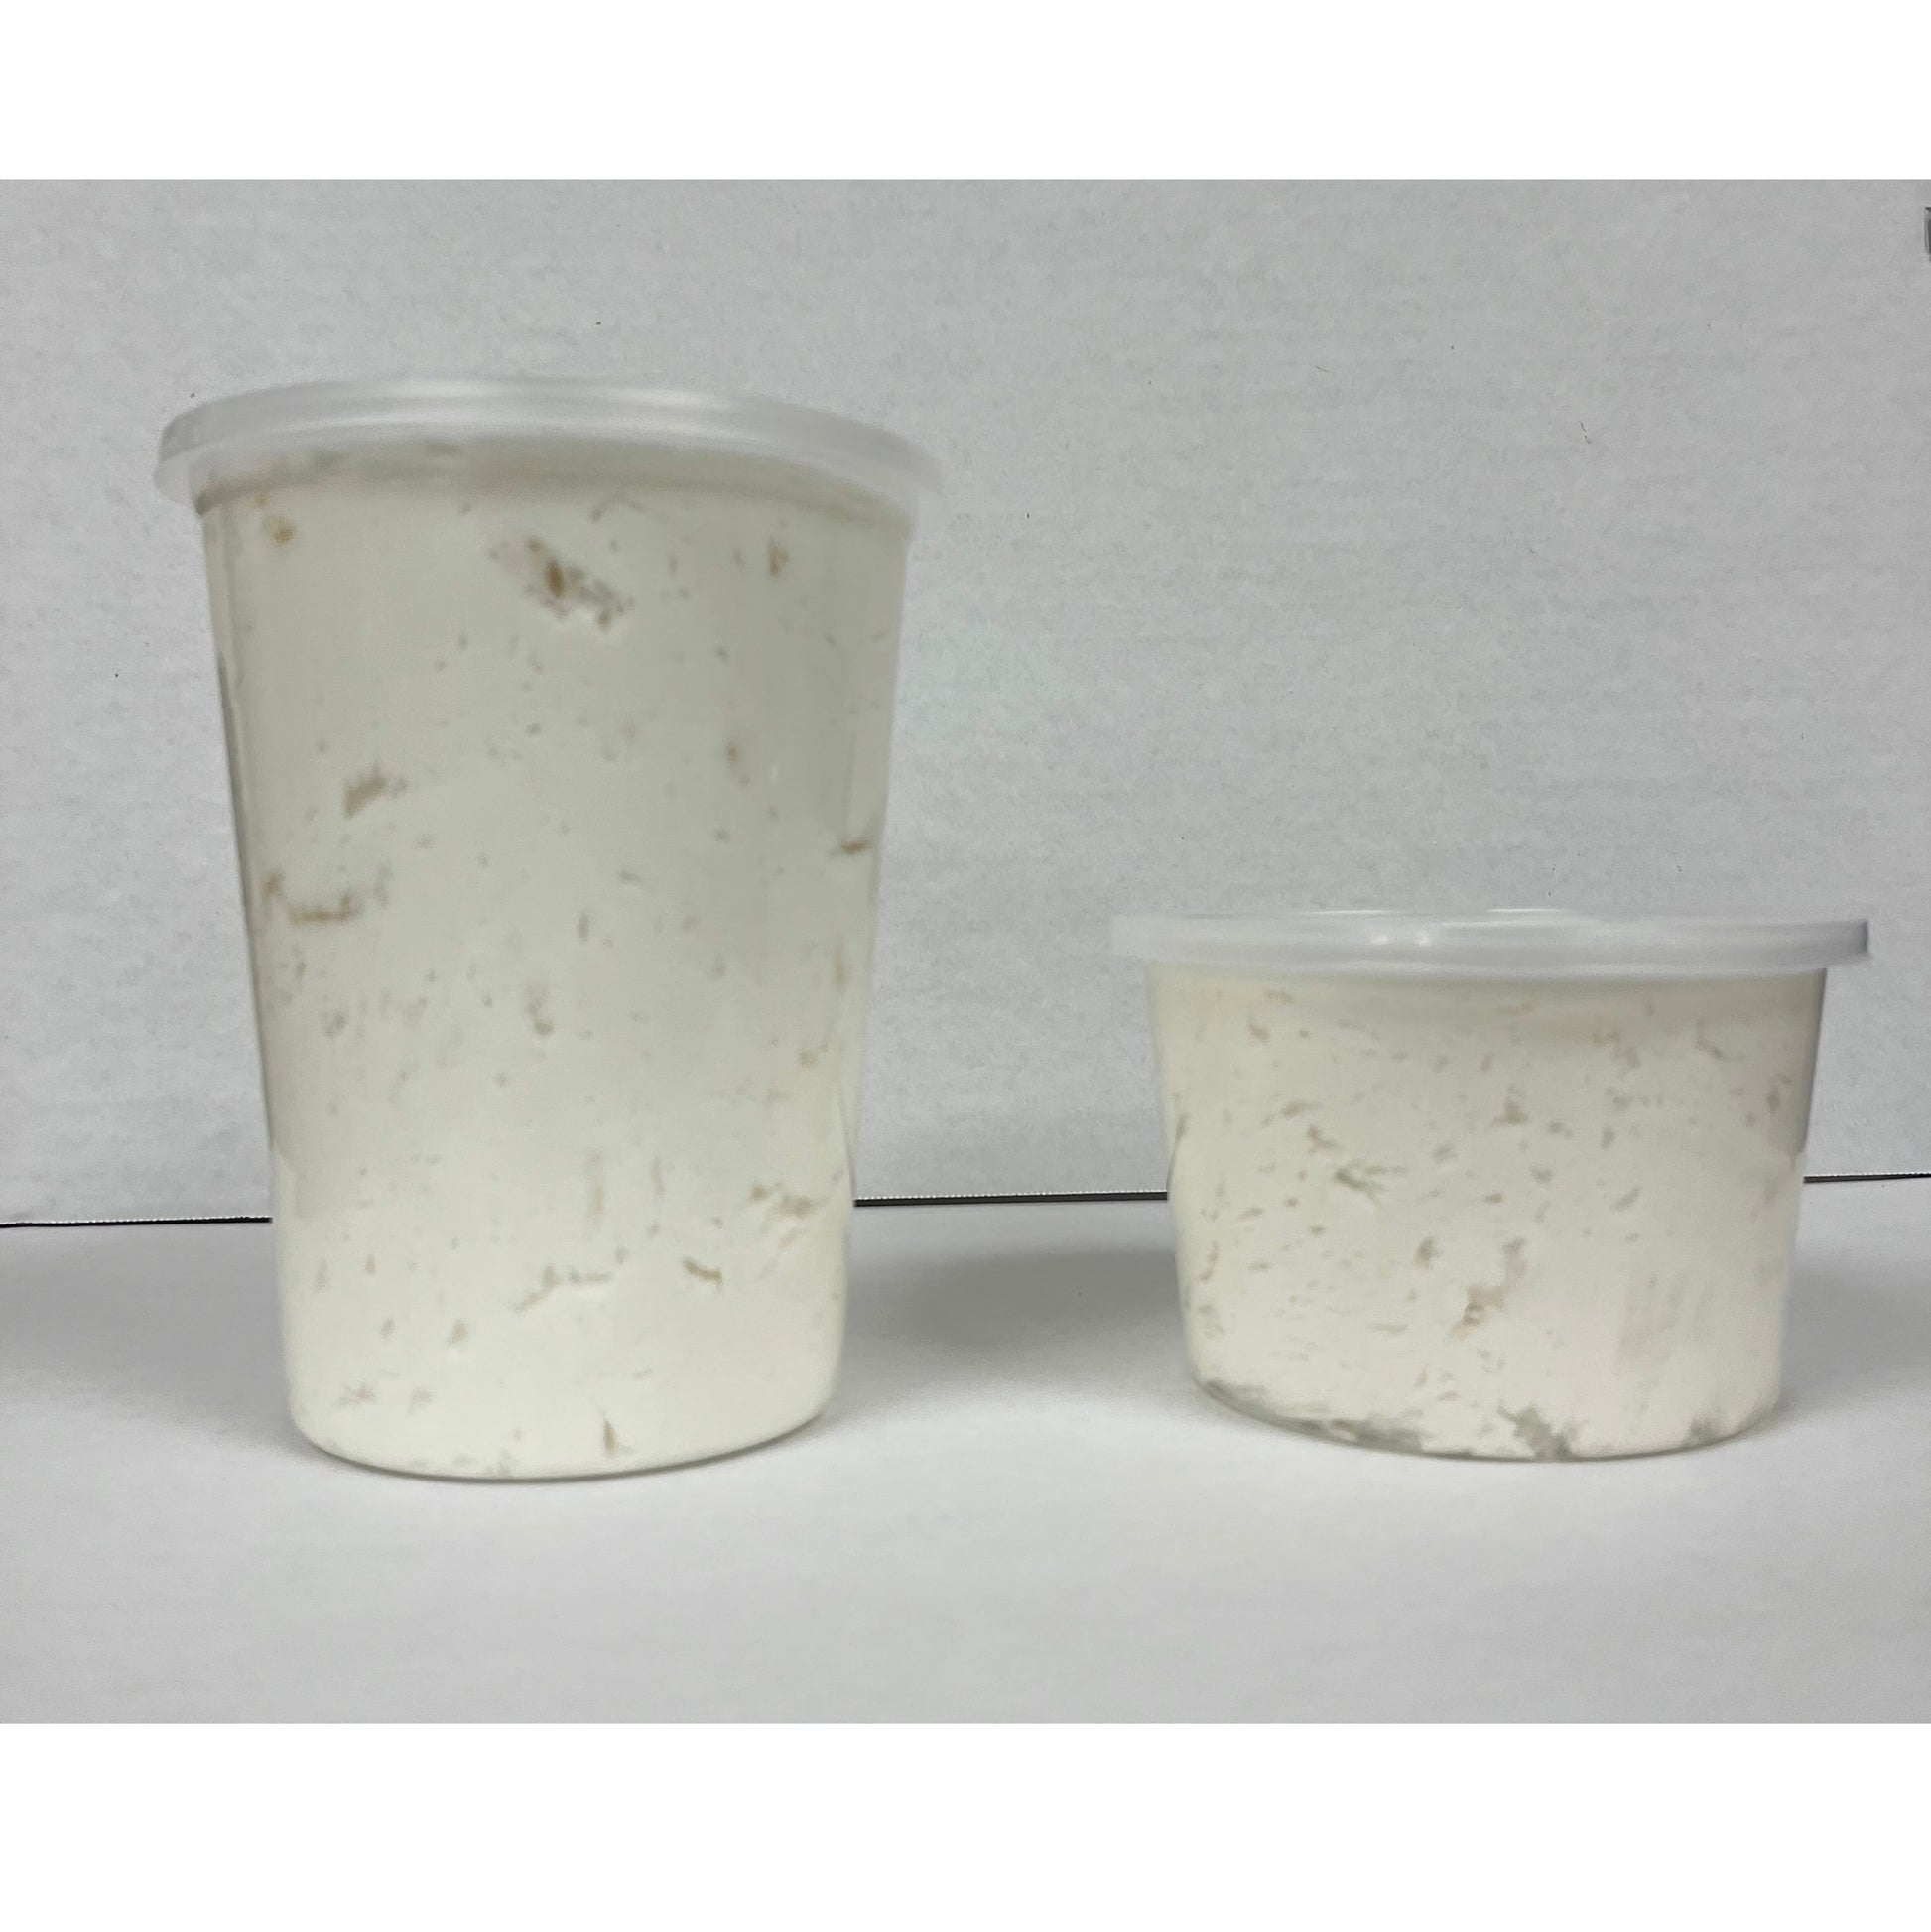 Two containers of dairy-free buttercream-style frosting, with the left container being larger and taller than the smaller, shorter one on the right. Both transparent plastic containers have white lids and are filled with a creamy, white frosting. The frosting appears fluffy and light, with visible air bubbles throughout, giving it a whipped consistency. The clean presentation emphasizes the product's texture and dairy-free attribute, appealing to those seeking alternative frosting options.